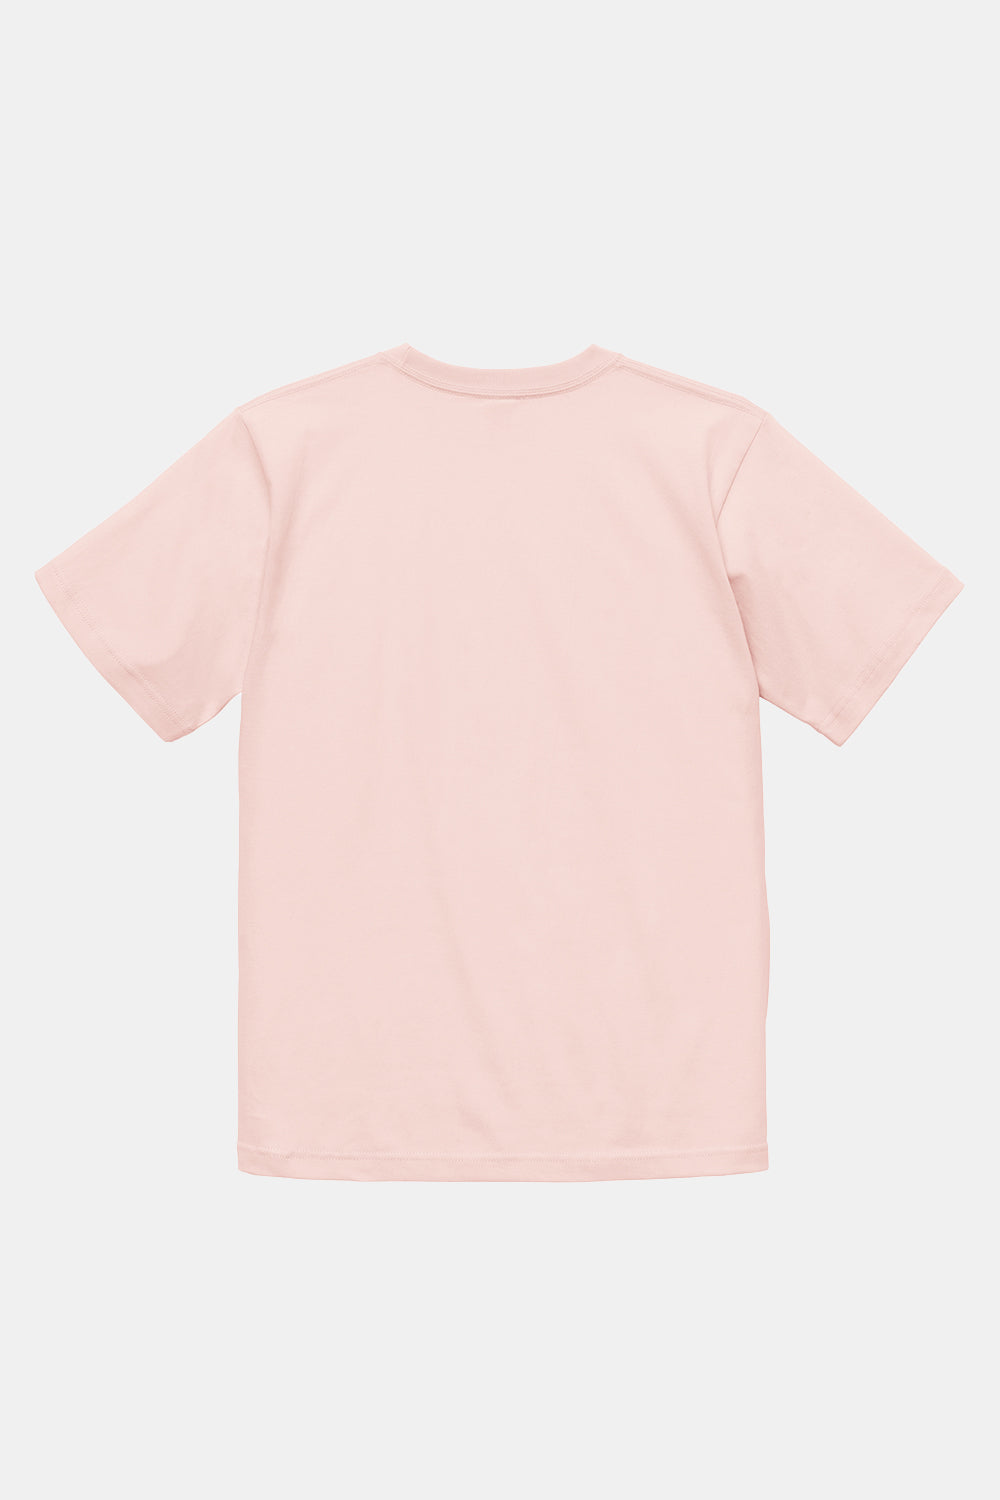 United Athle 5942 Classic Heavyweight 6.2oz T-shirt (Baby Pink)
